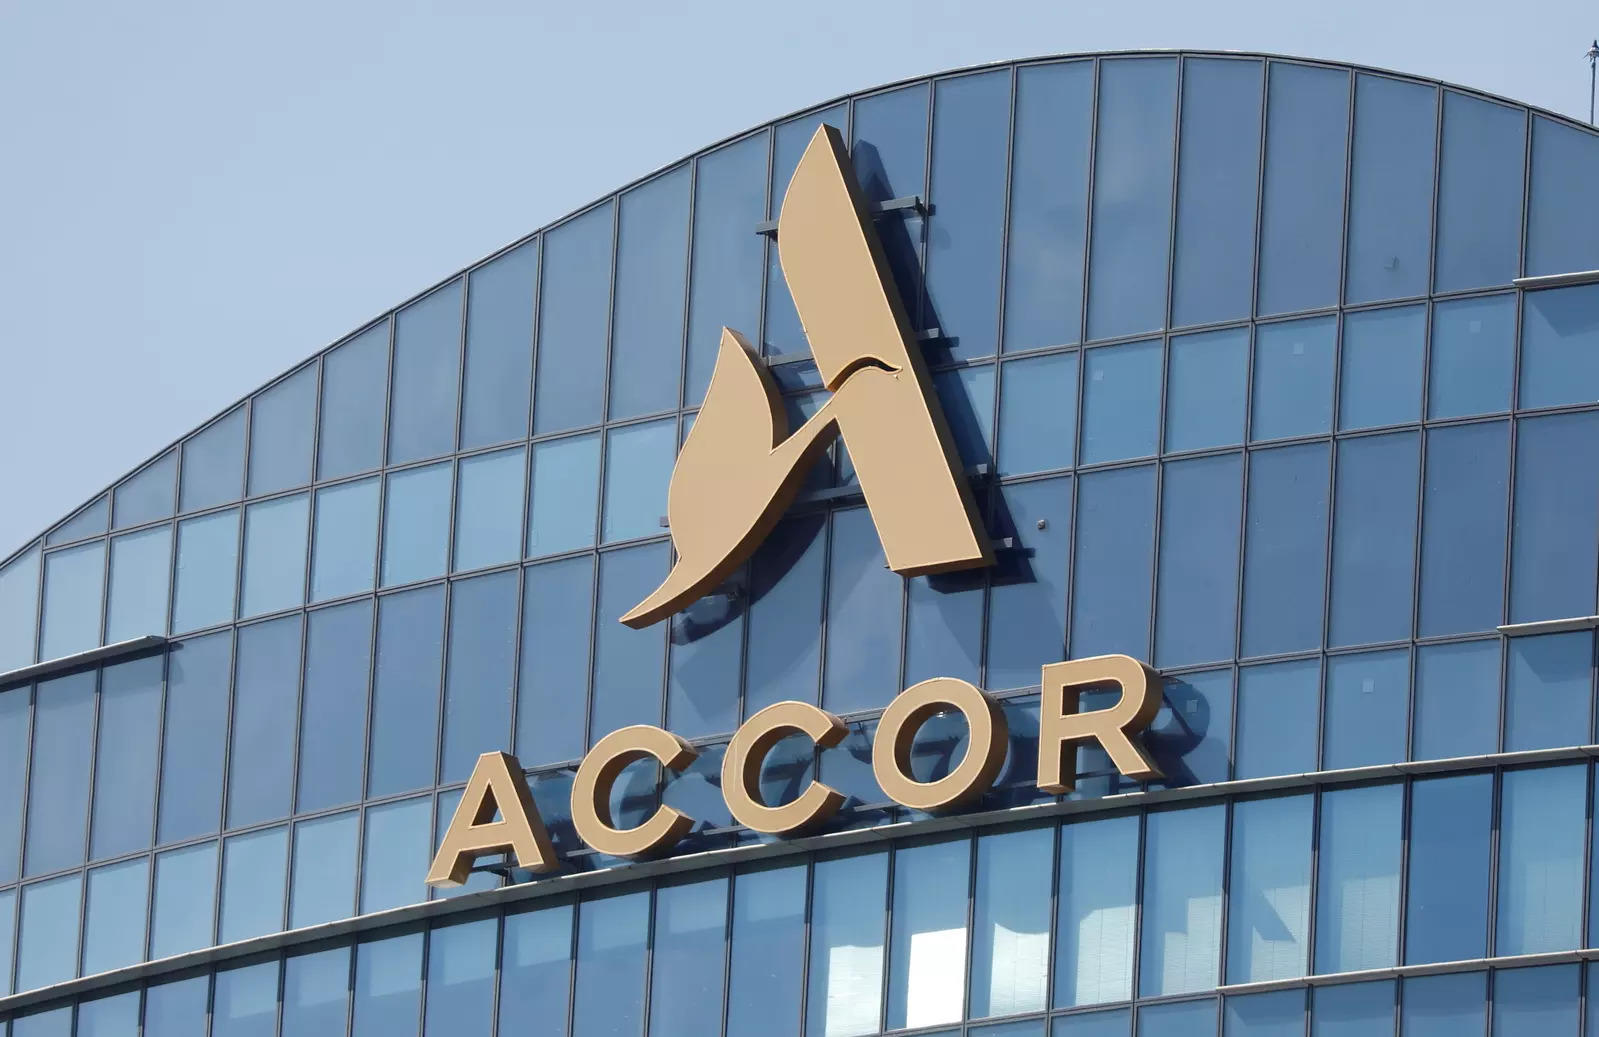 Hotel group Accor swings back to profit as travel business rebounds